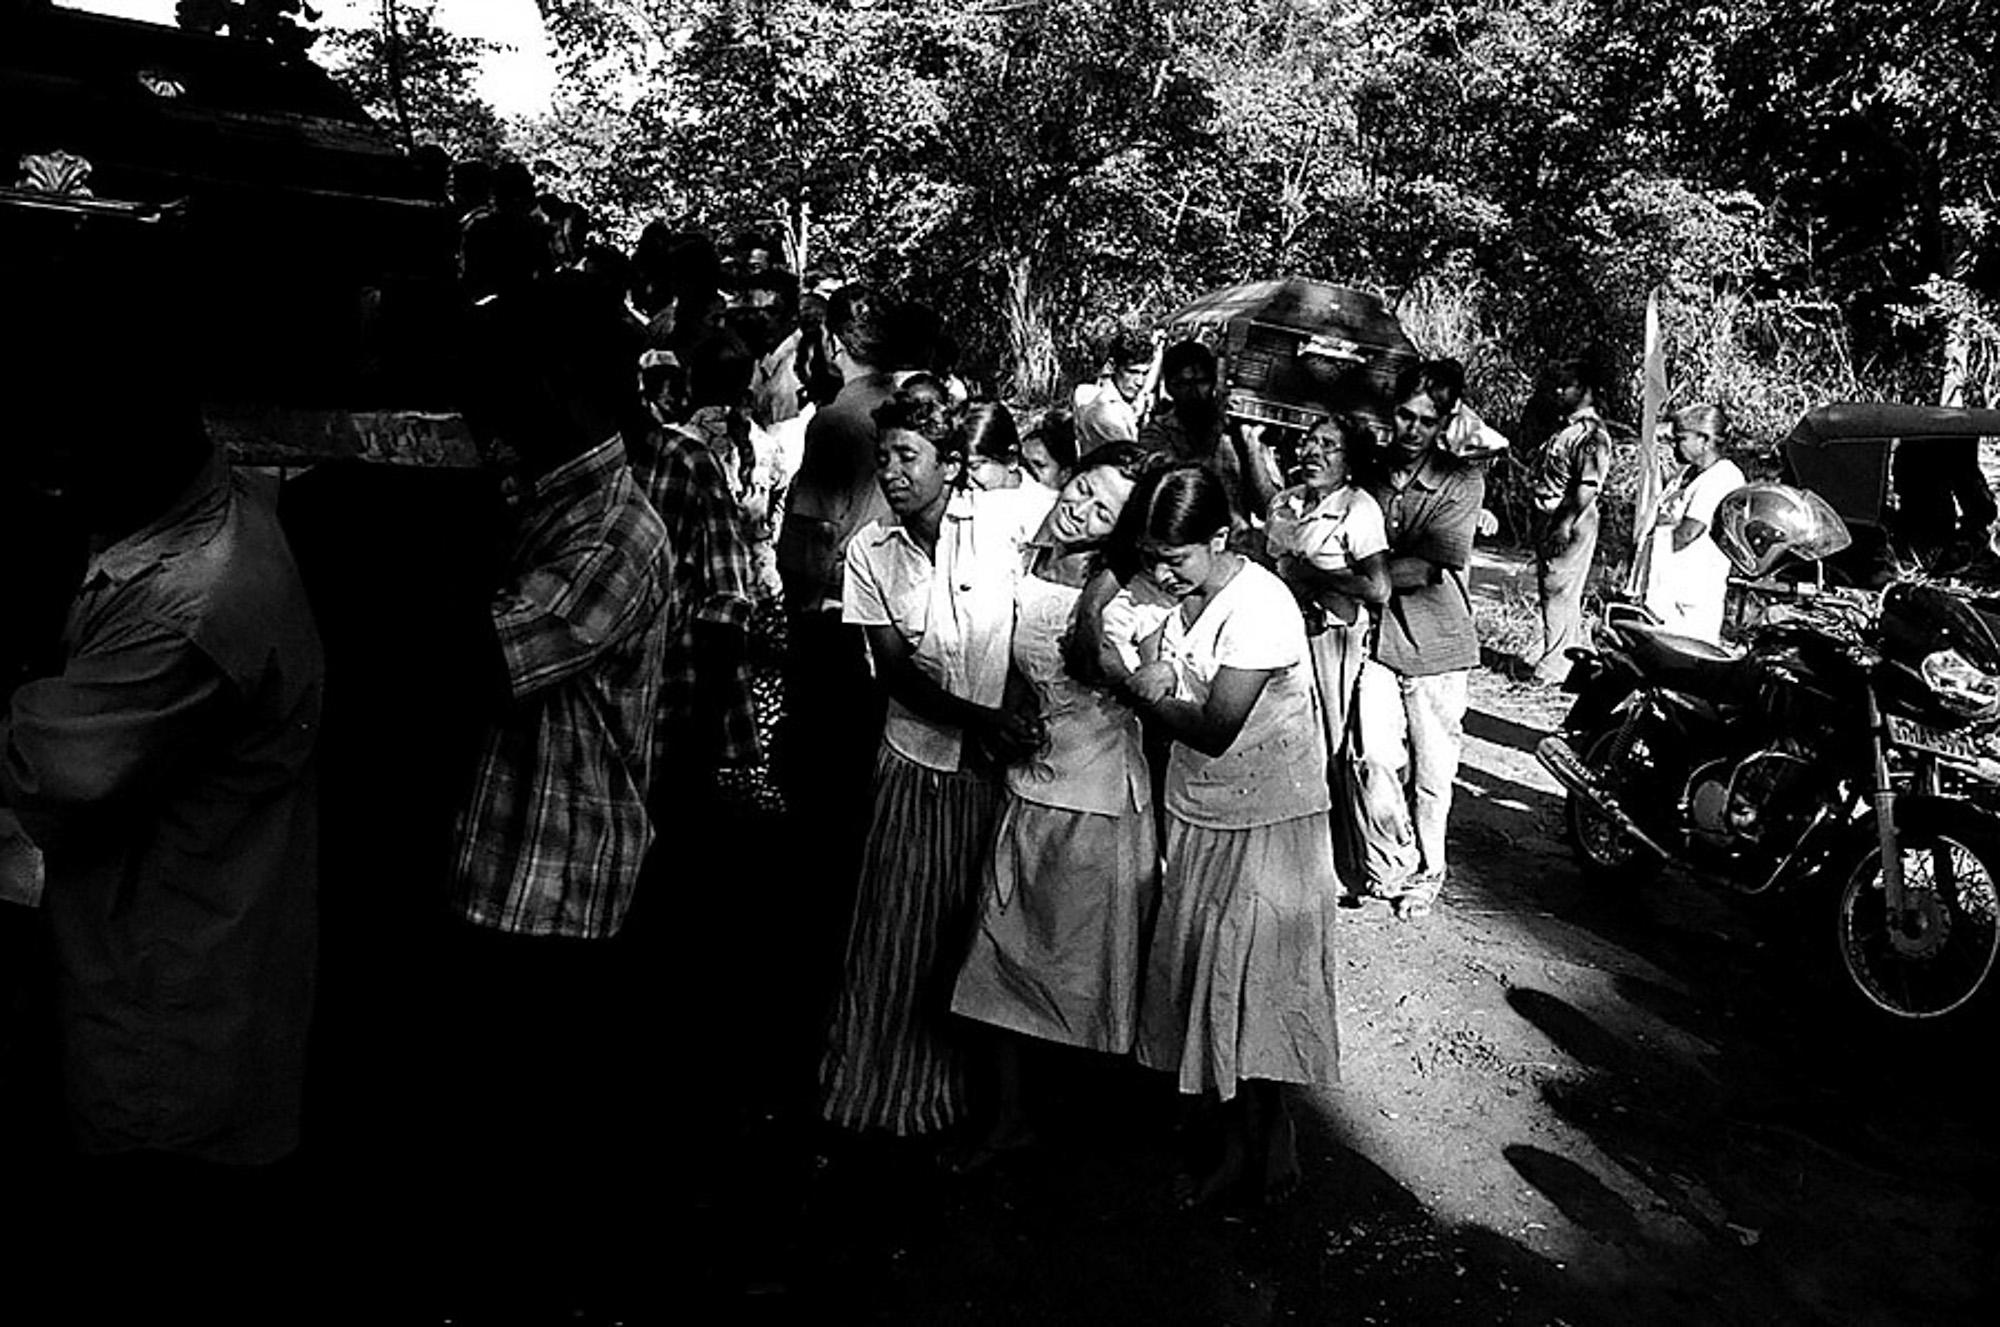 family members of Sinhalese civilians who were killed by a roadside claymore mine explosion made allegedly &nbsp; by LTTE carders , mourn their loved ones death during a mass funeral for 26 people killed in the incident, Buttala, South Sri Lanka